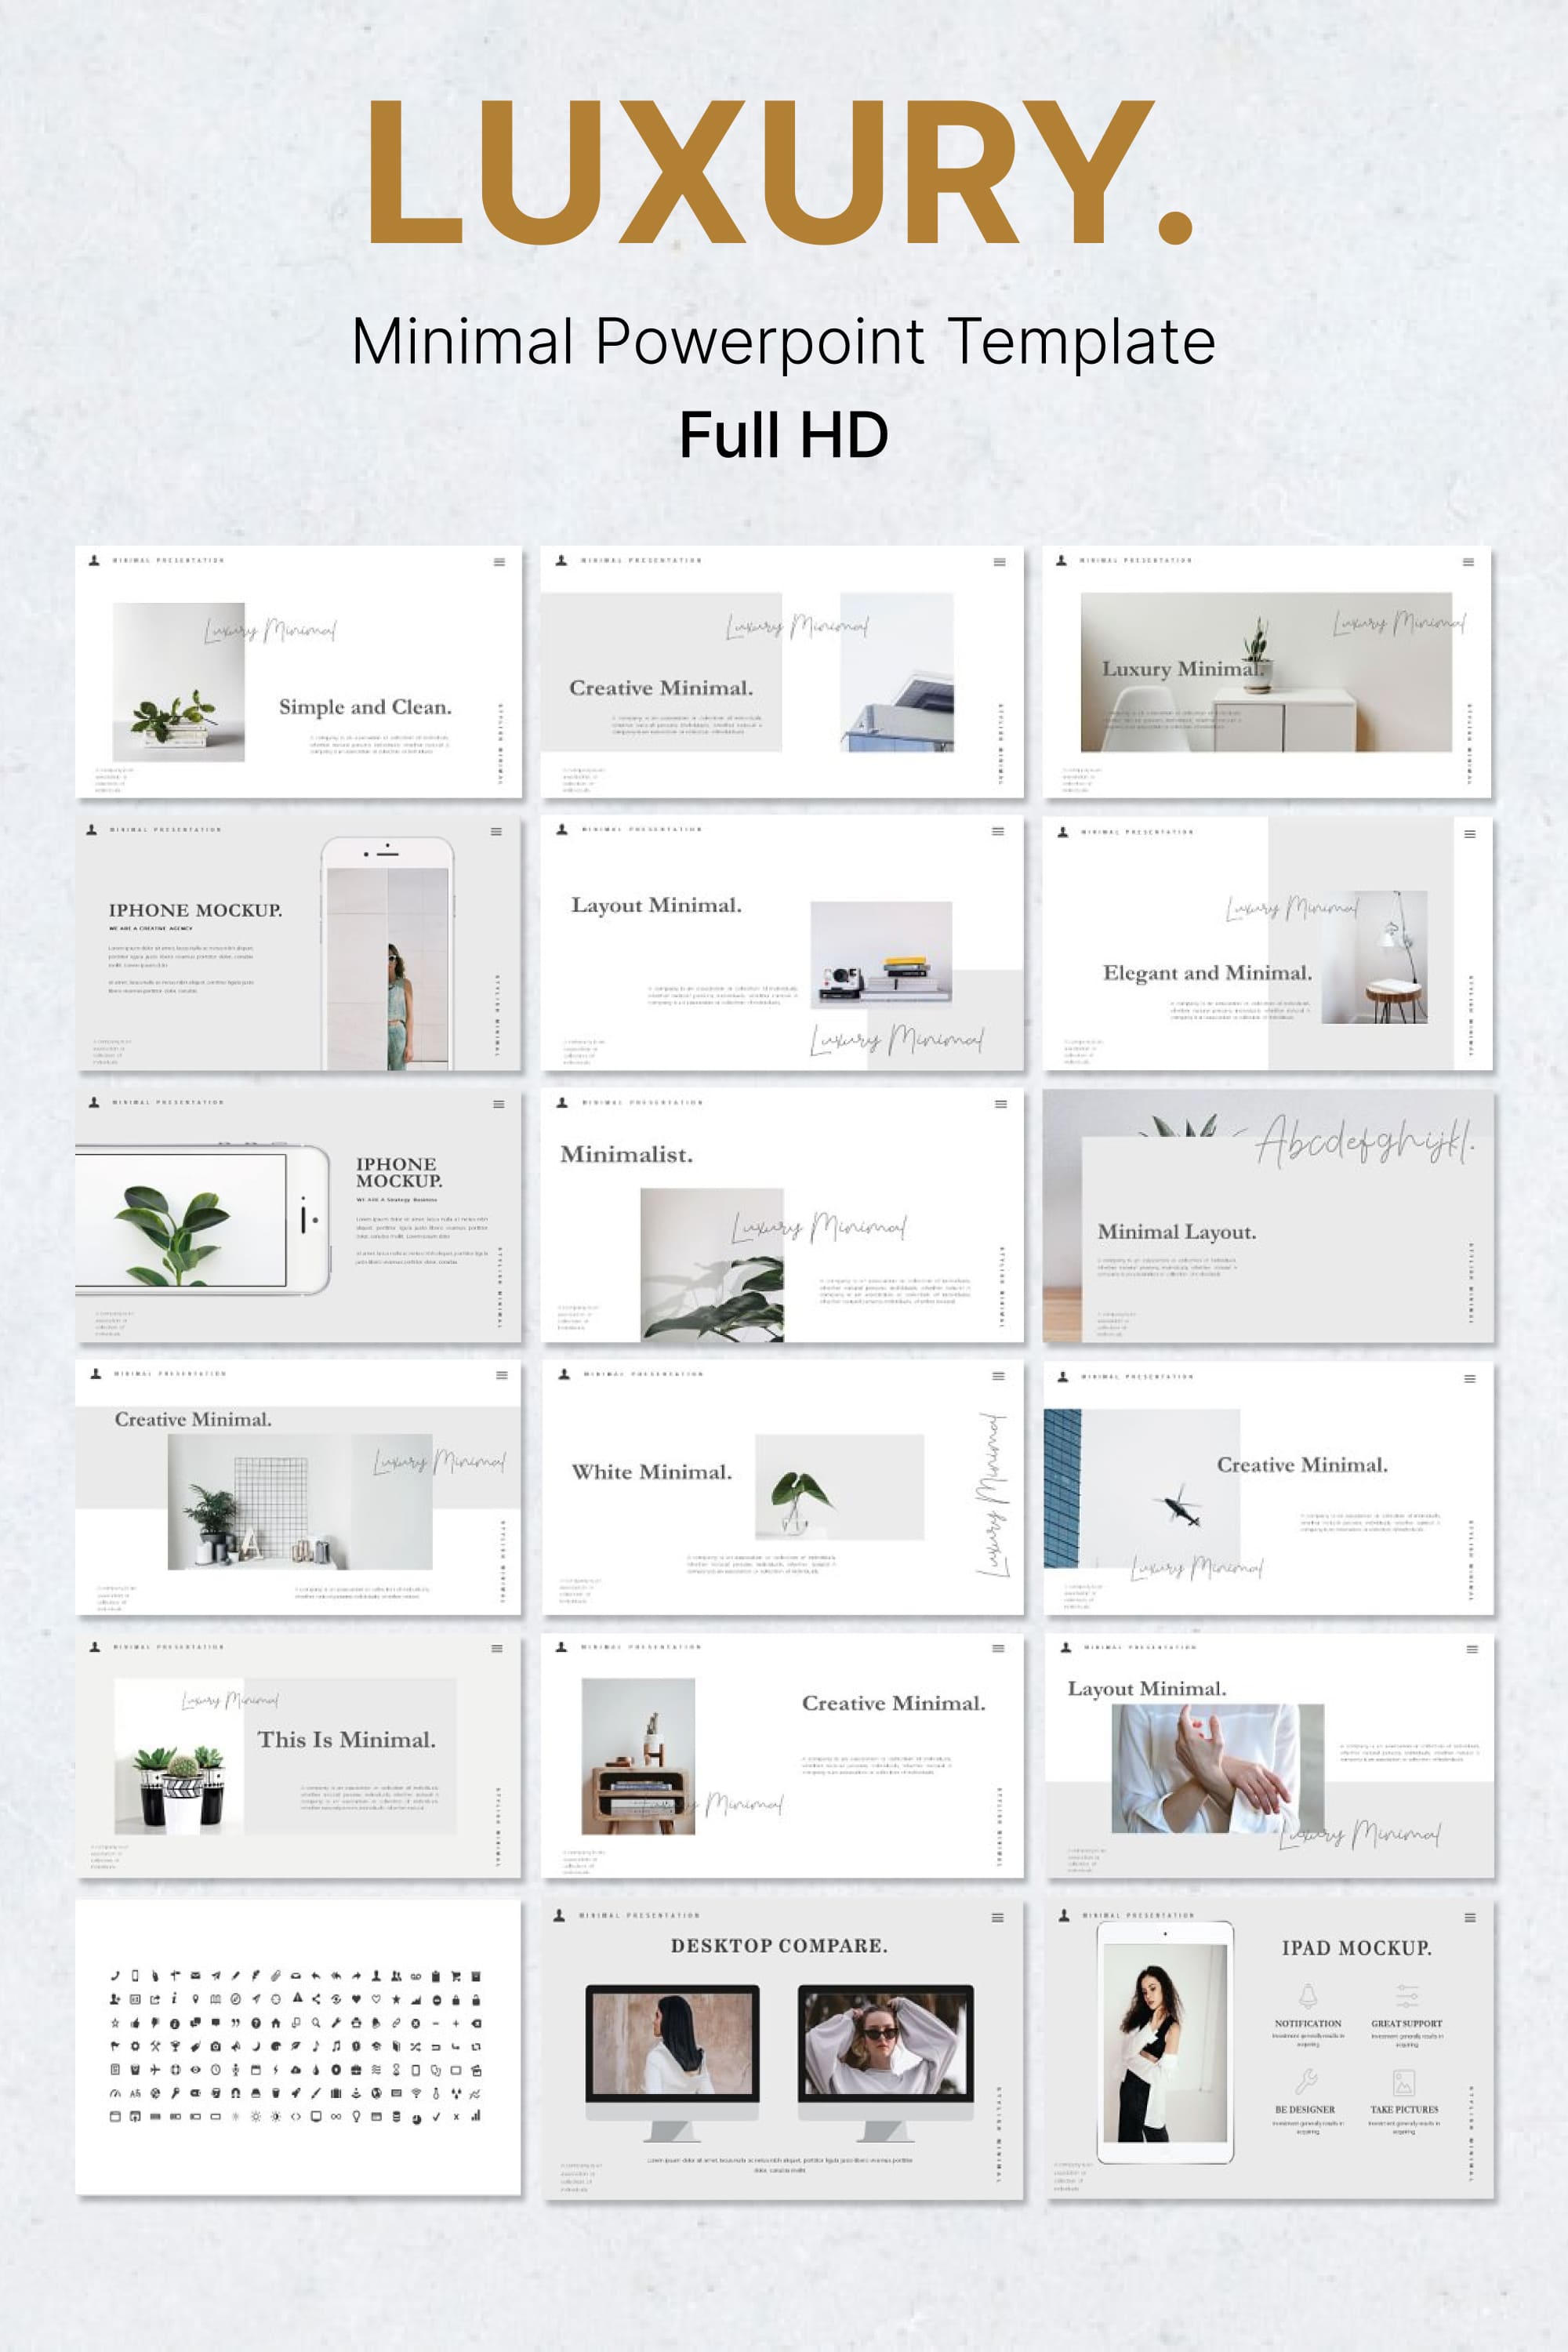 Luxury minimal powerpoint template - pinterest image preview.